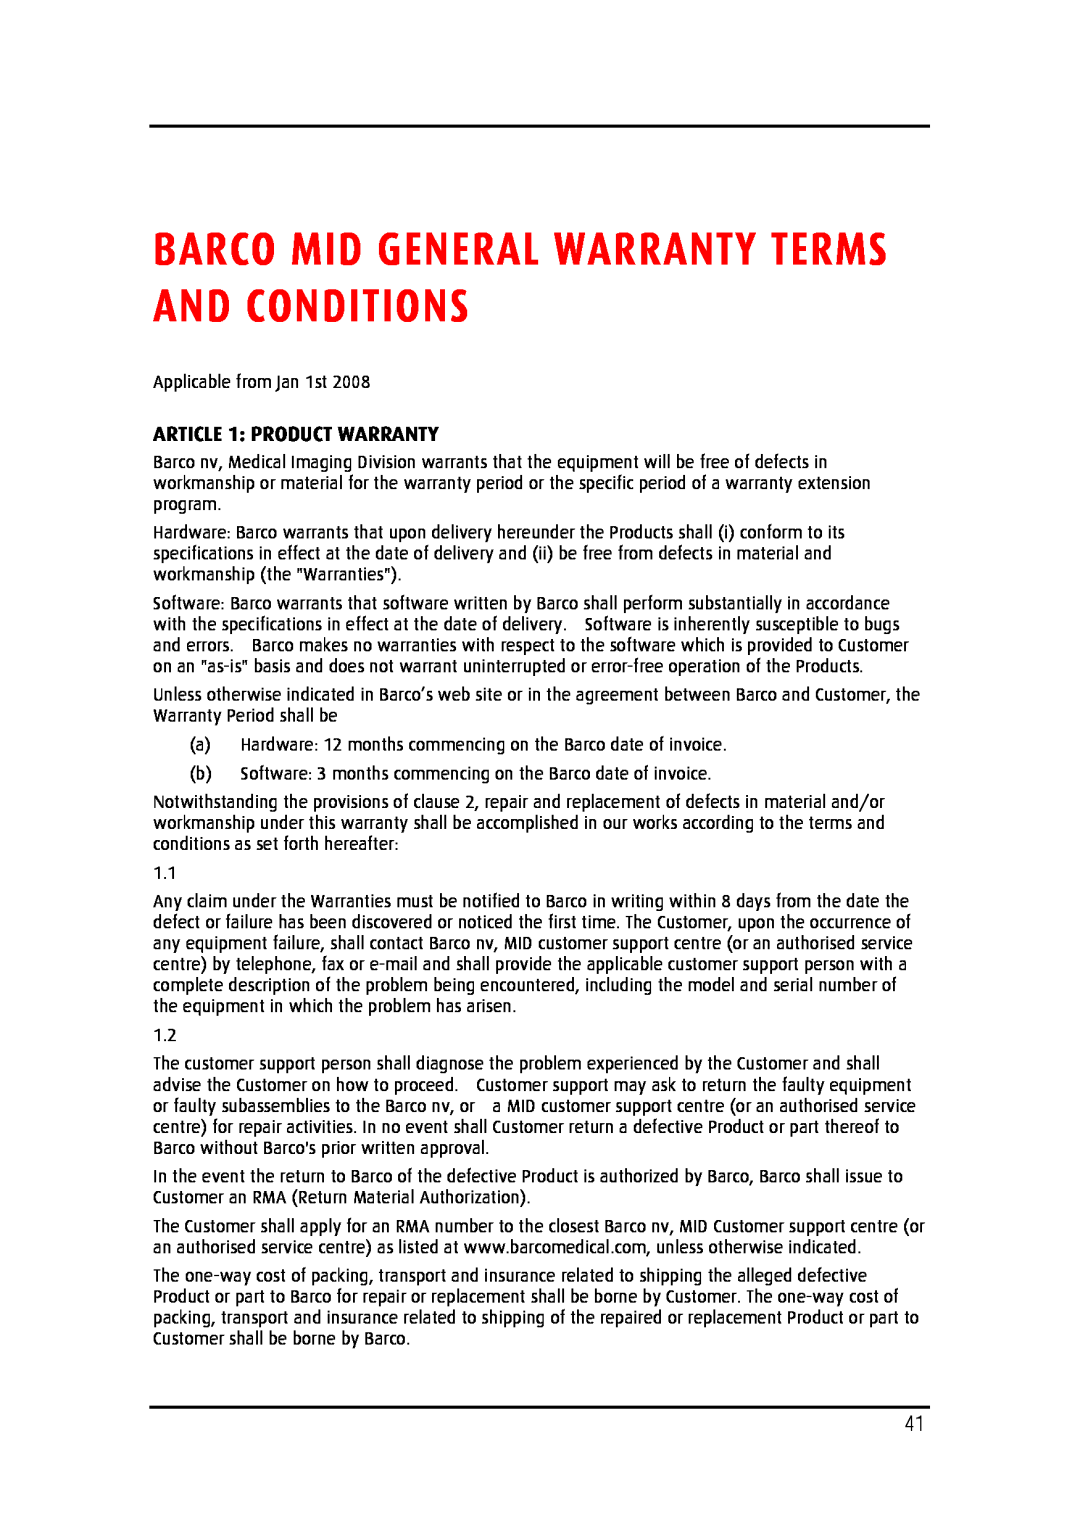 Barco MDRC-2124 user manual Barco Mid General Warranty Terms And Conditions, ARTICLE 1 PRODUCT WARRANTY 